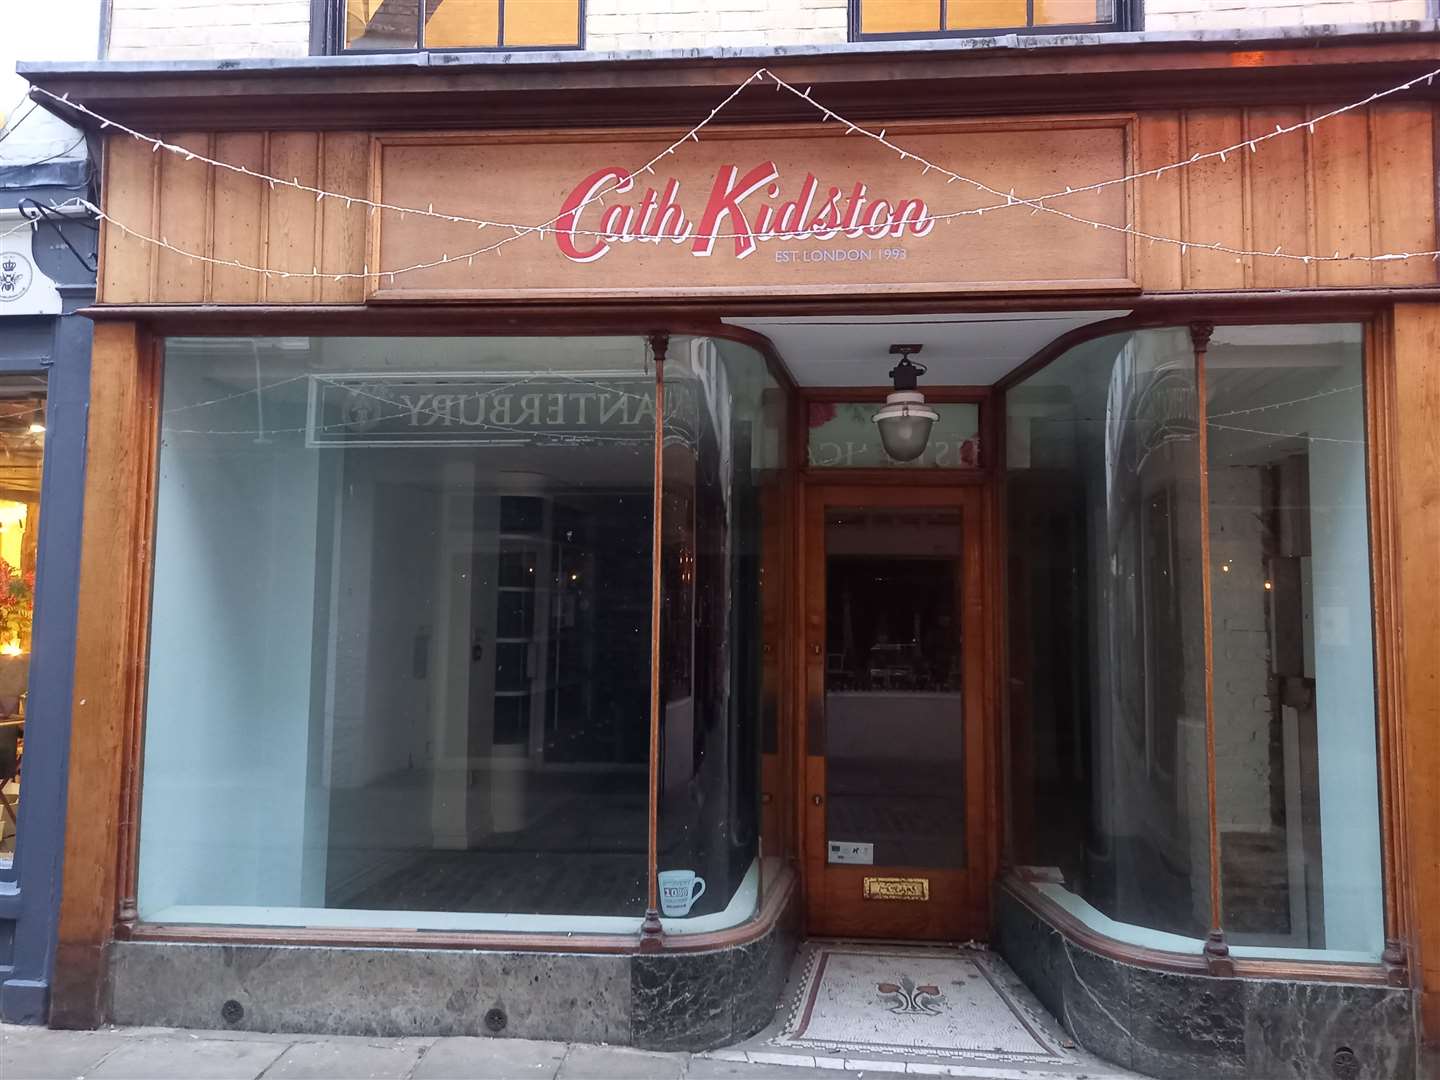 The former Cath Kidston store remains barren